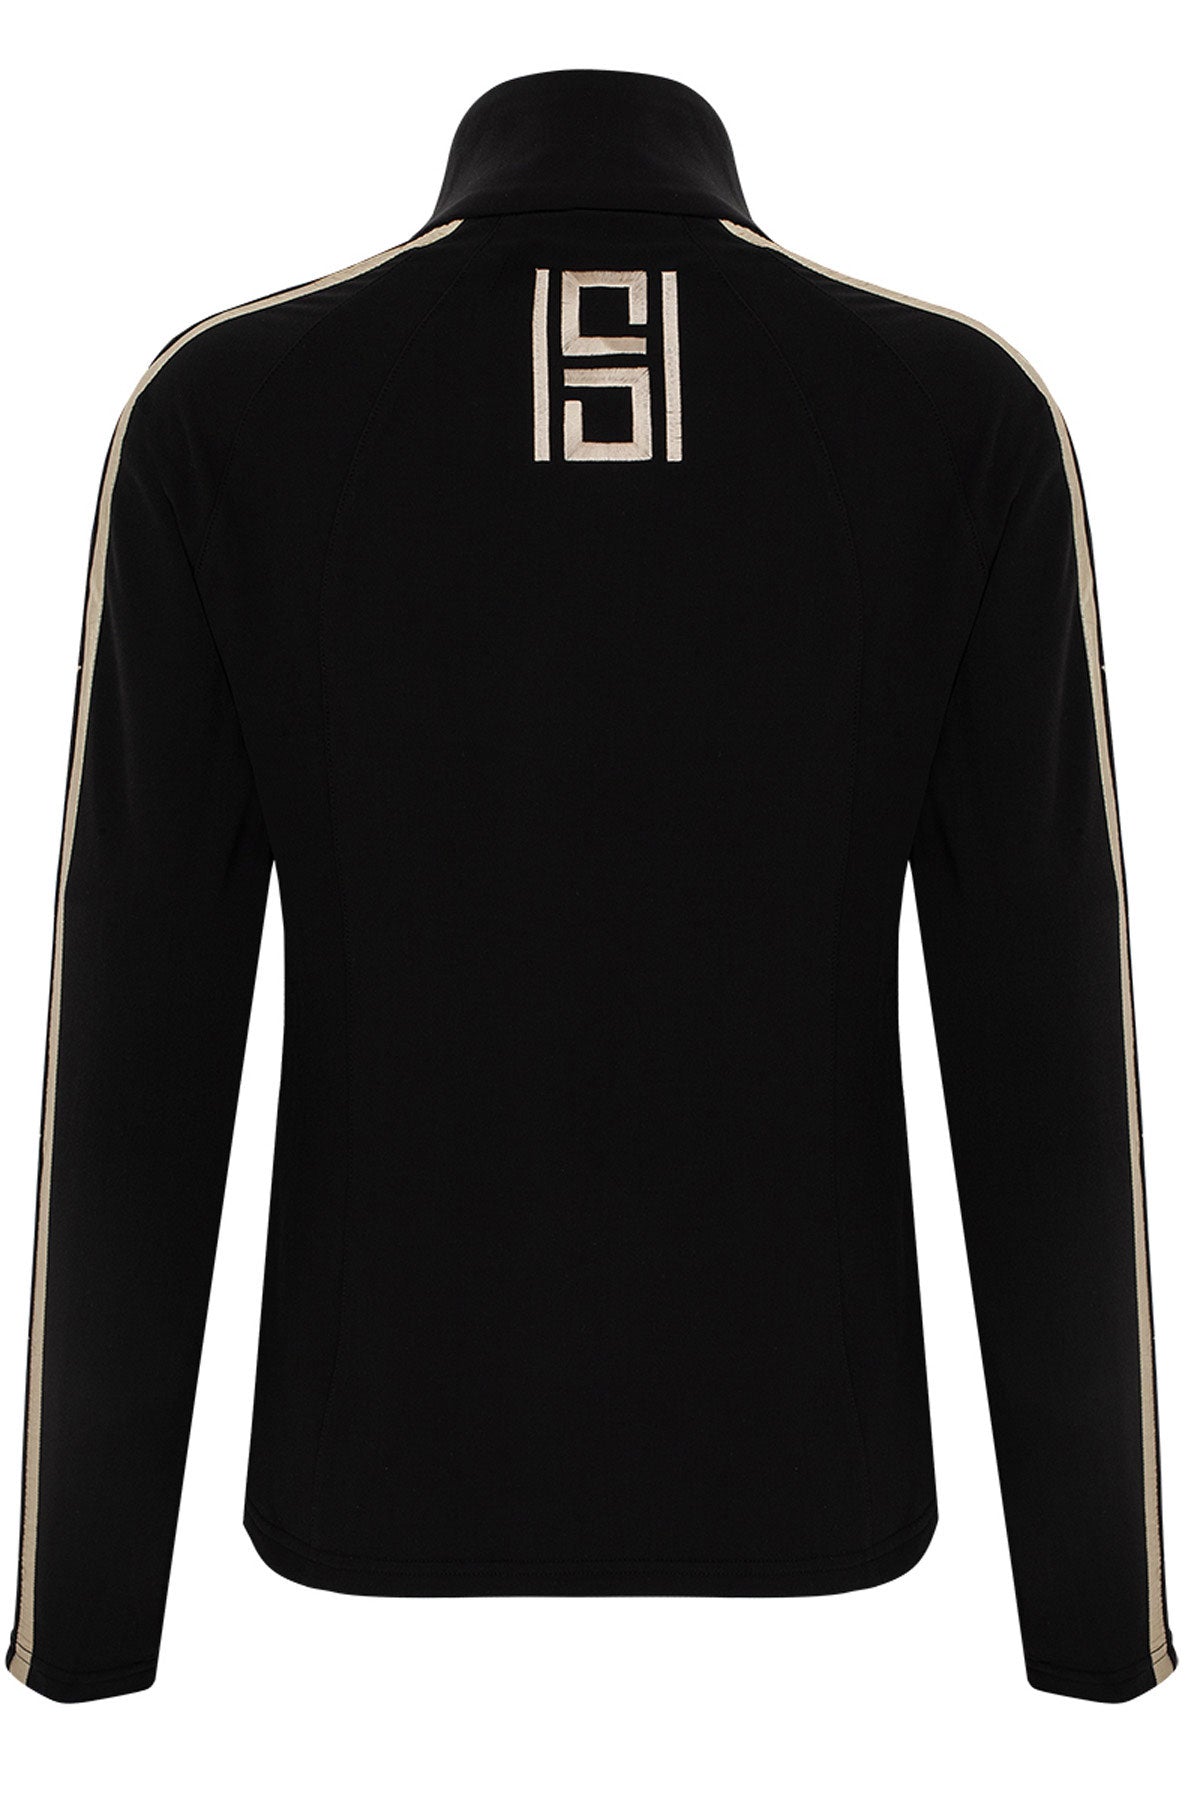 High Society Whitney Base Layer in Black and Gold